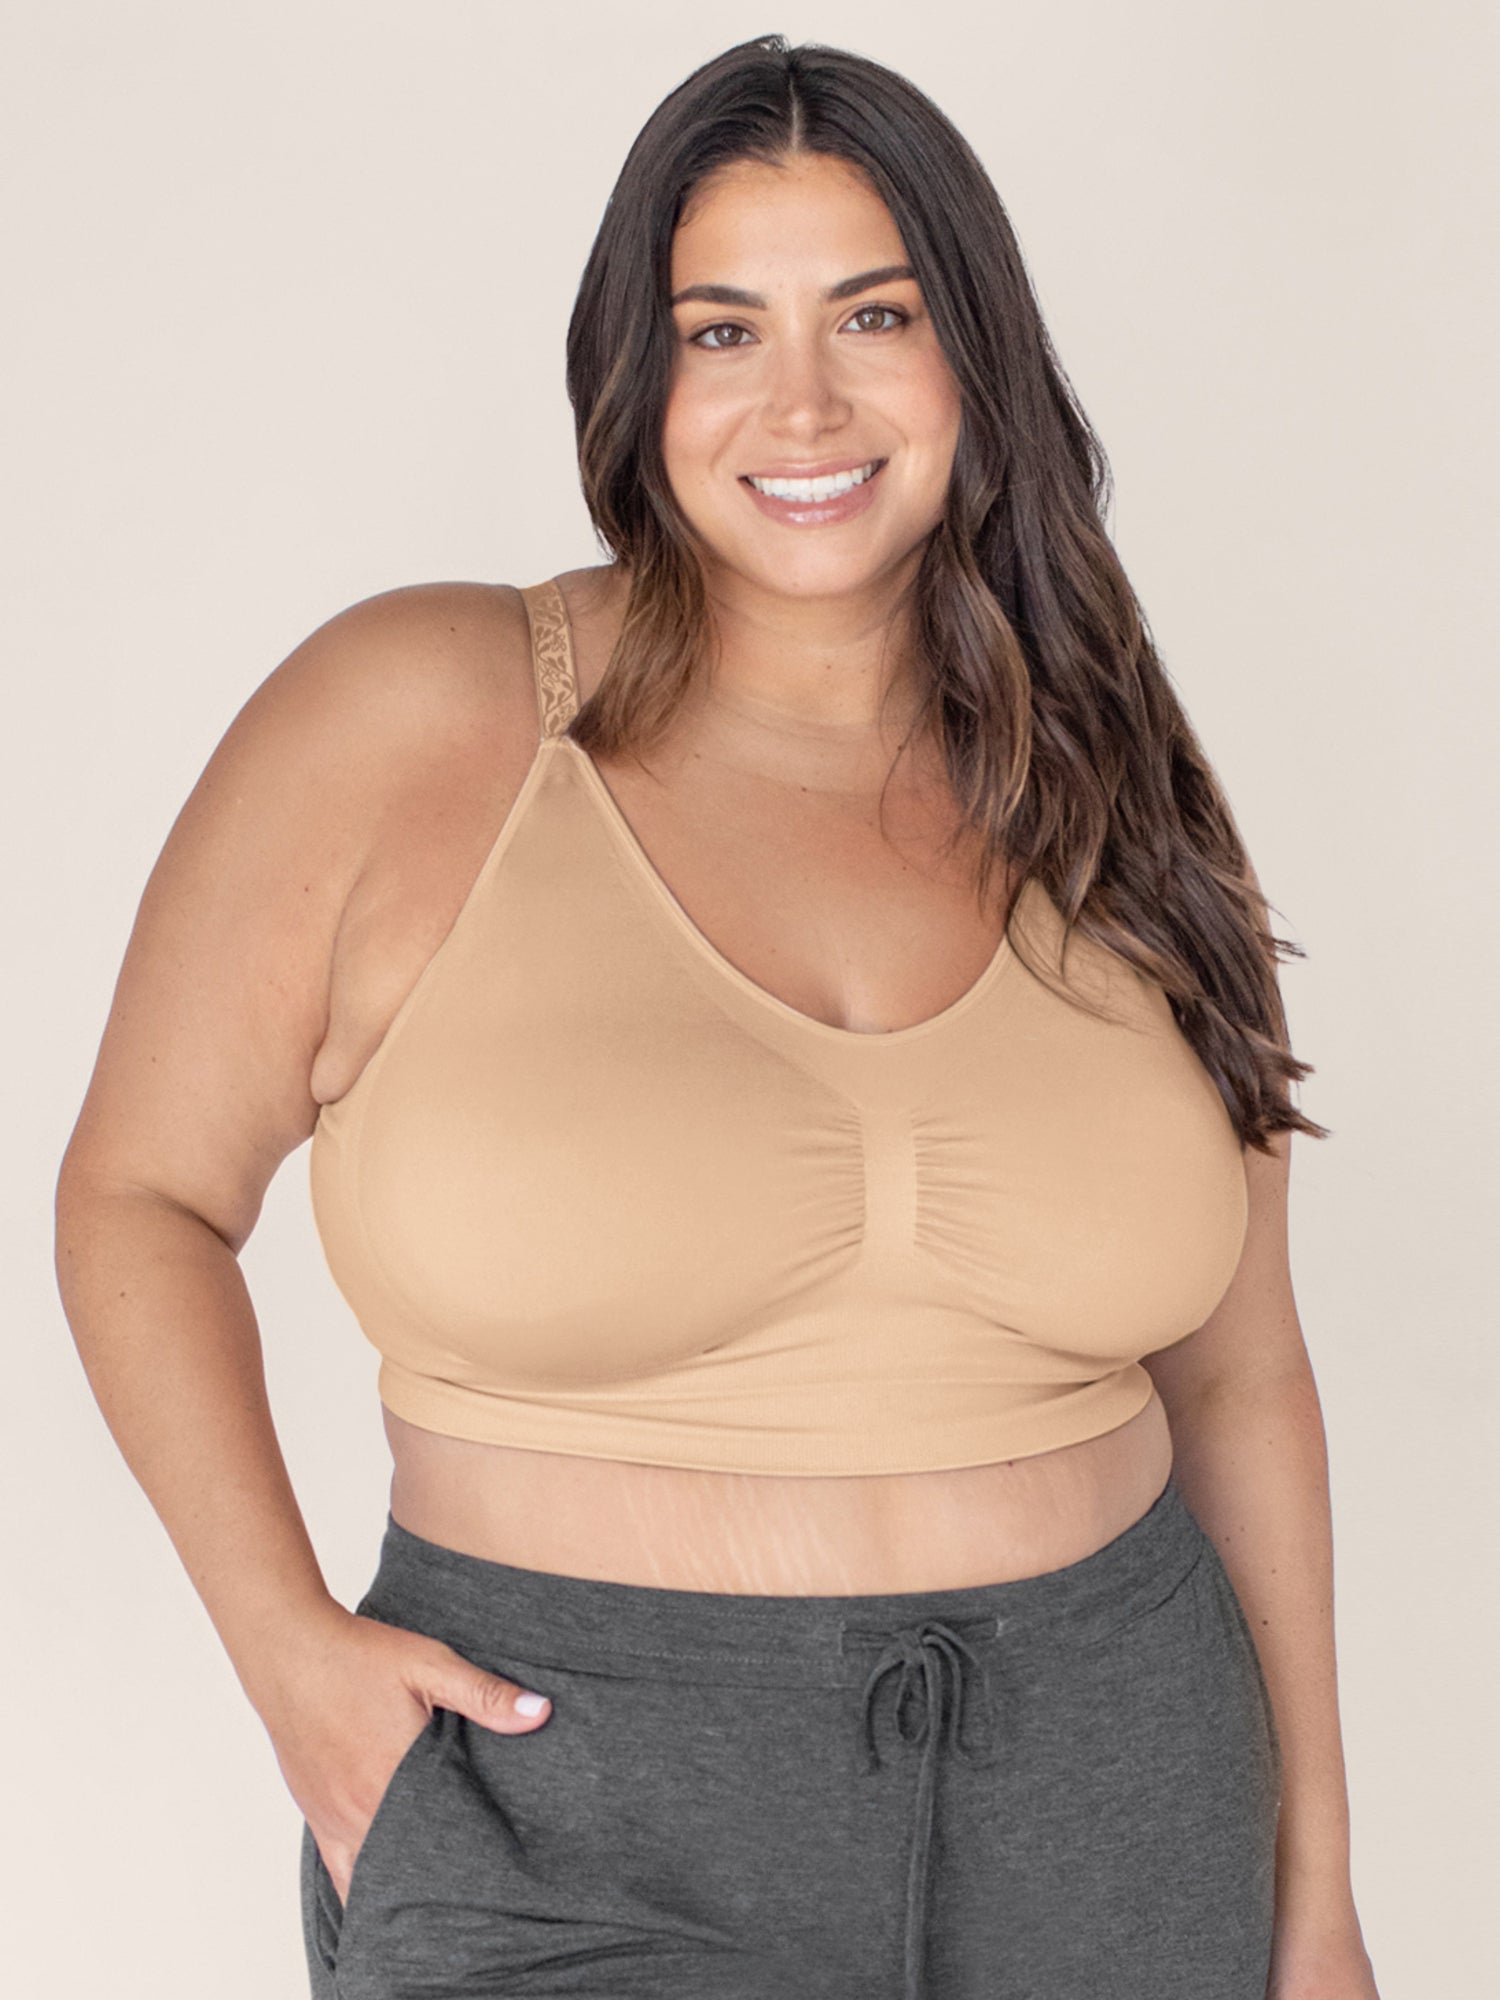 Wholesale plus size open cup bra - Offering Lingerie For The Curvy Lady 